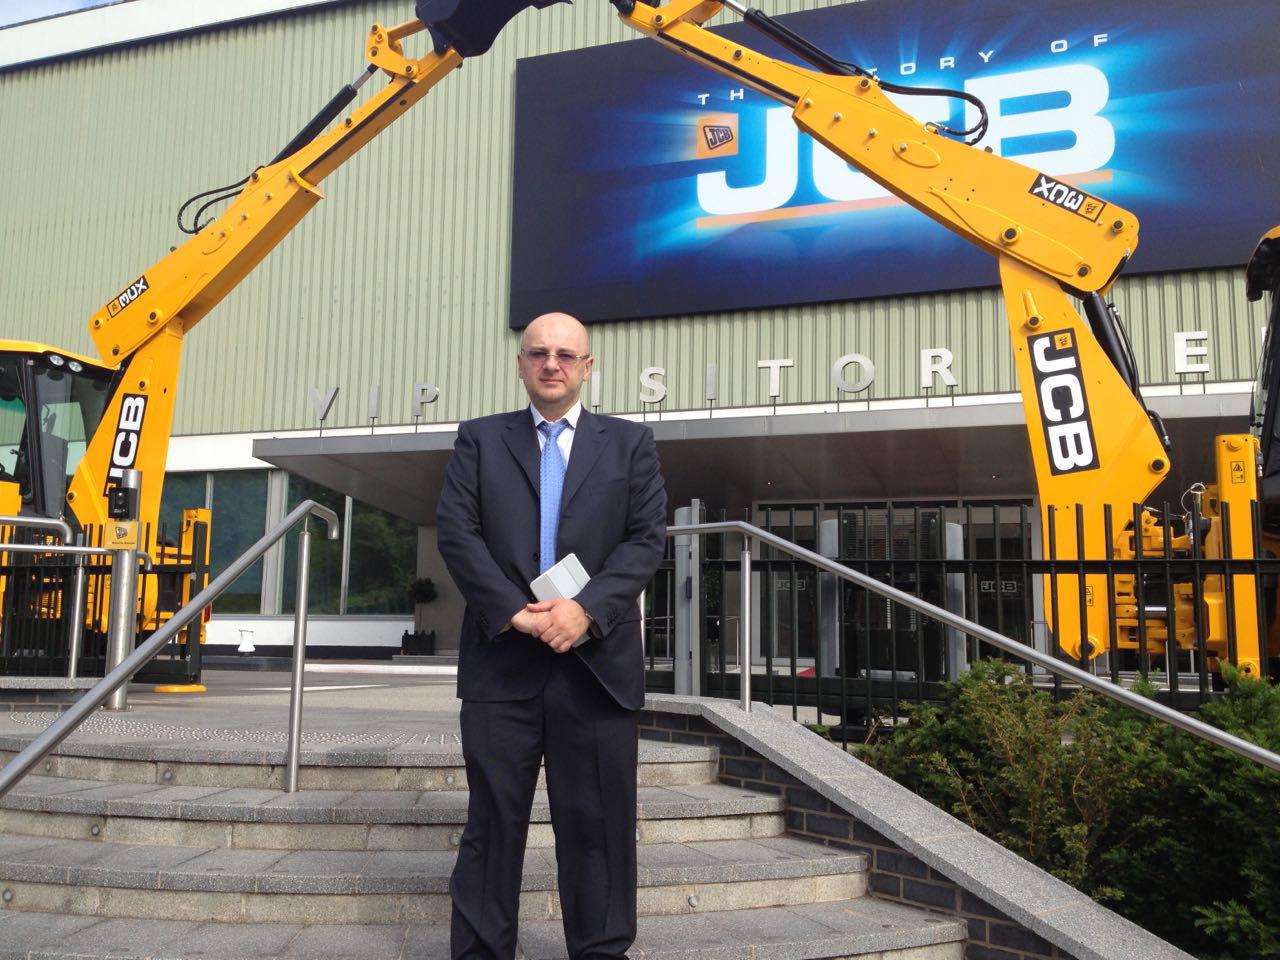 The company’s management visit to JCB factory - manufacturer of backhoe loaders in Rochester, UK